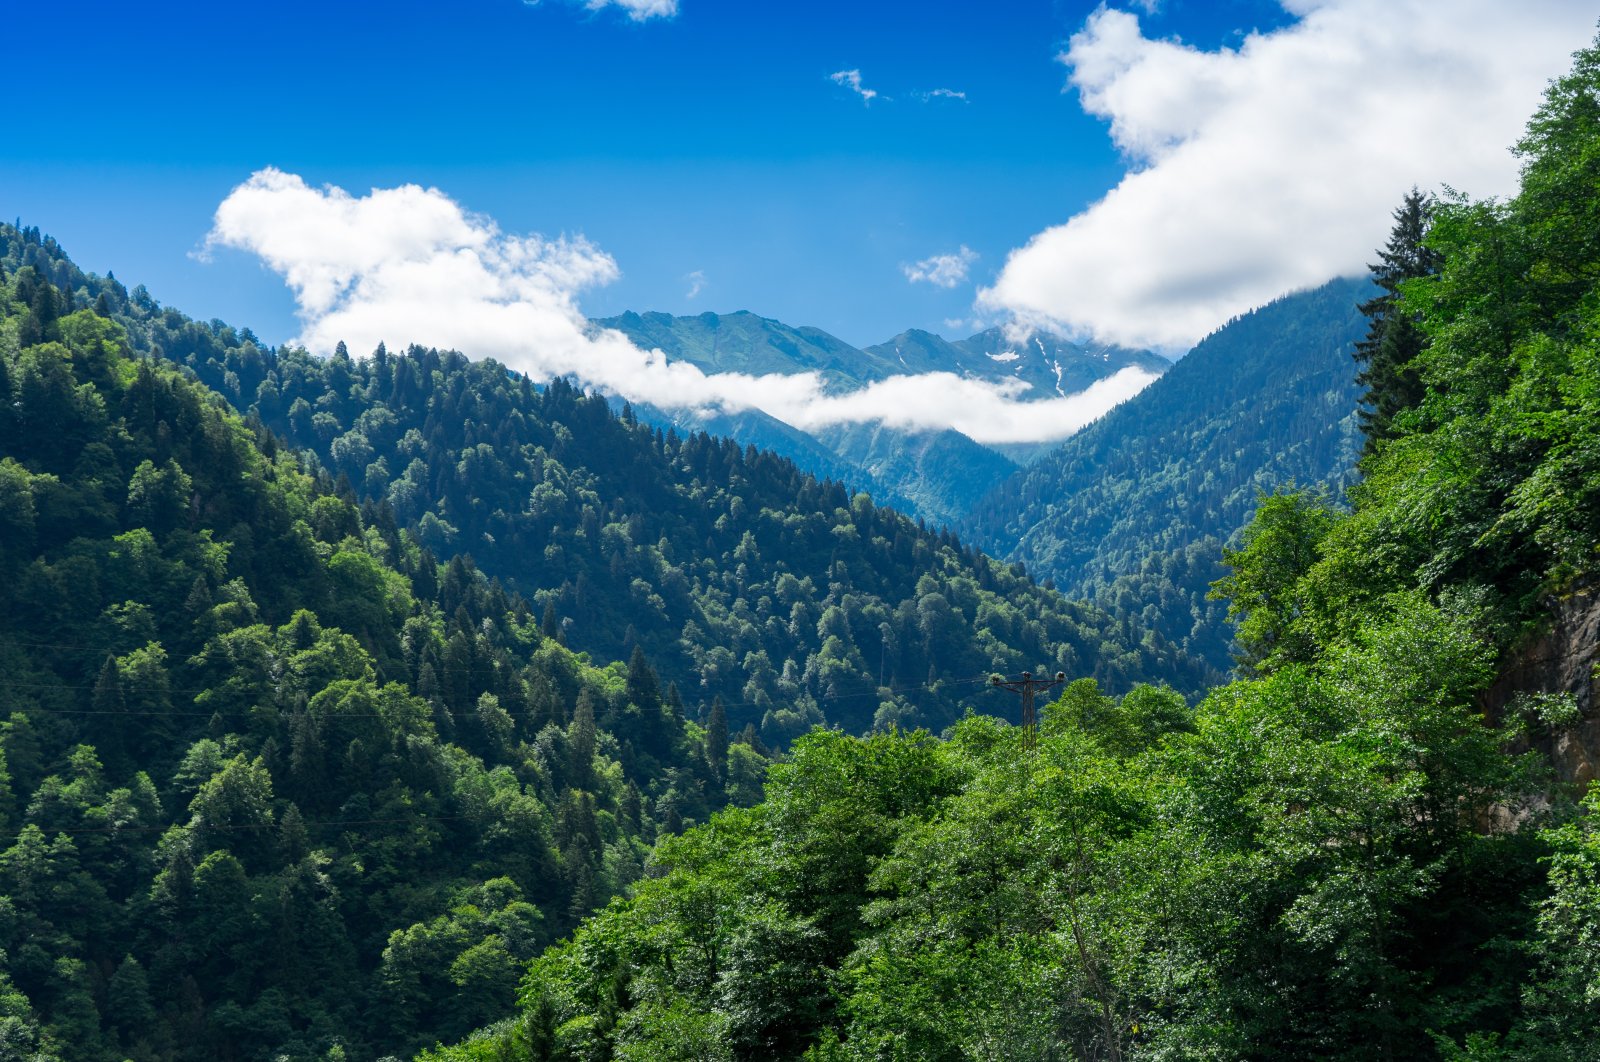 In this undated file photo, a view of Kaçkar Mountains is seen in the Rize province in the Black Sea region, northern Turkey. (Photo by Shutterstock)